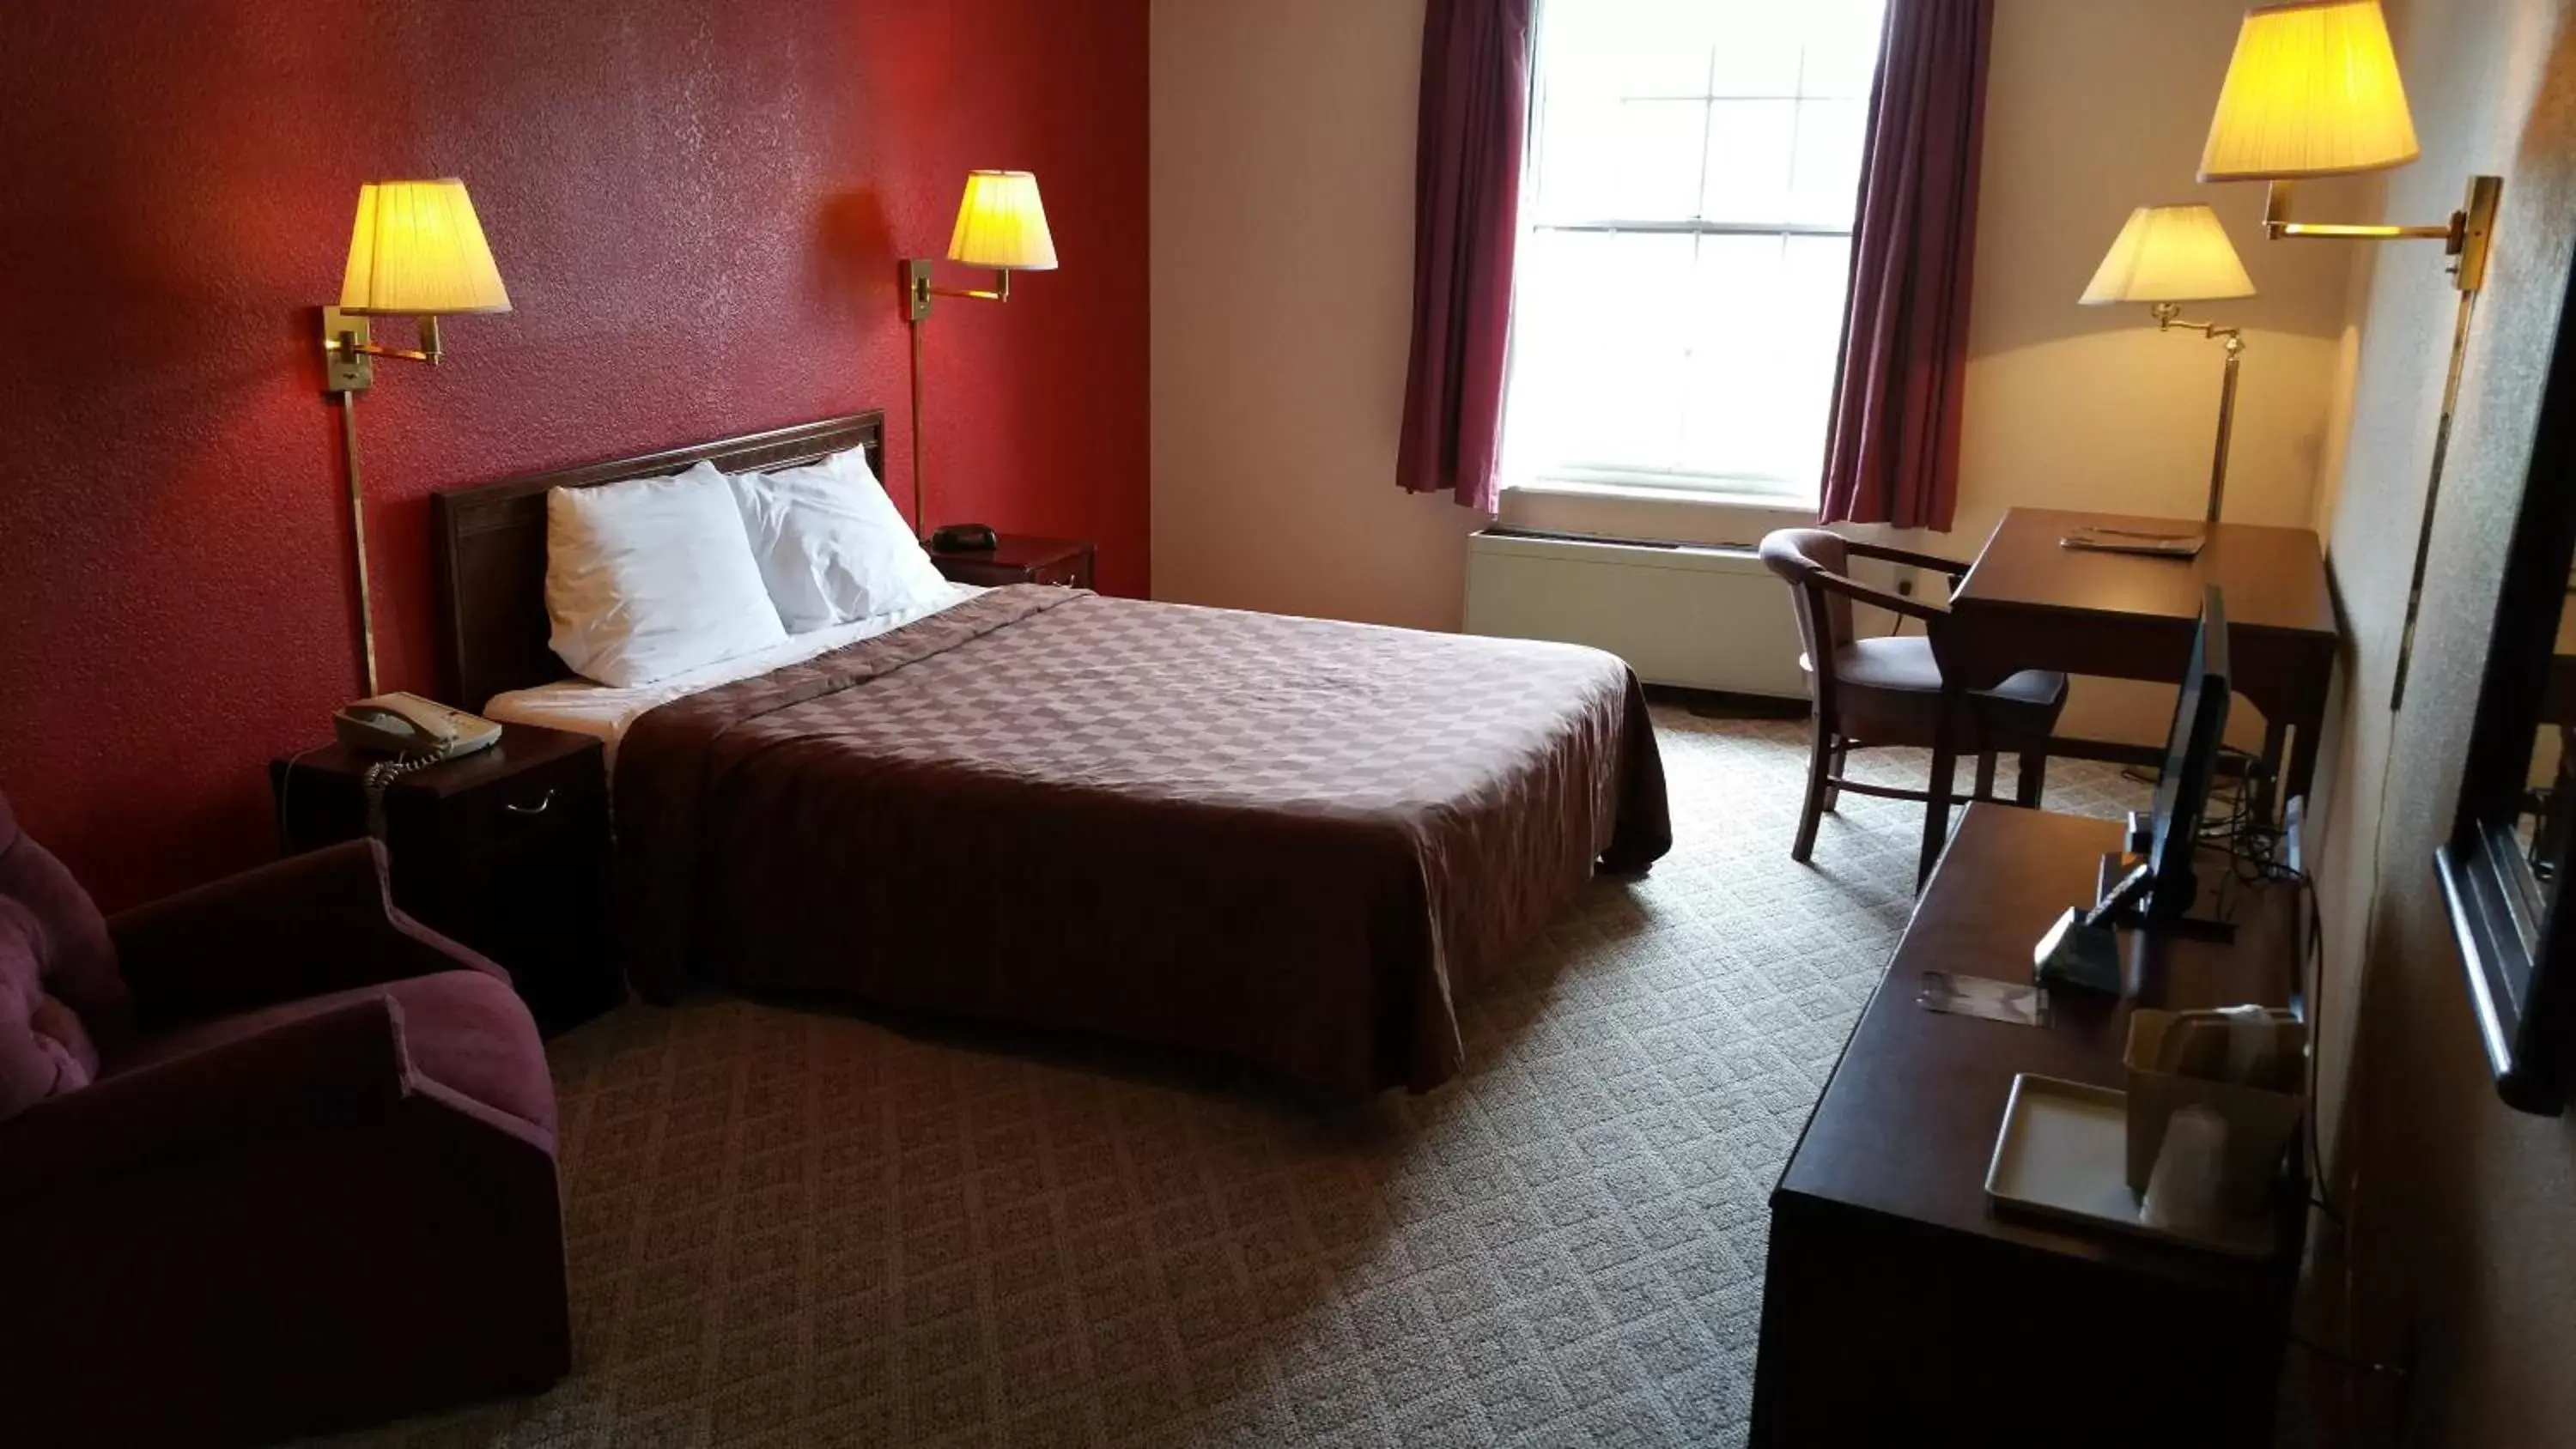 Bedroom, Bed in Americourt Hotel and Suites - Elizabethton